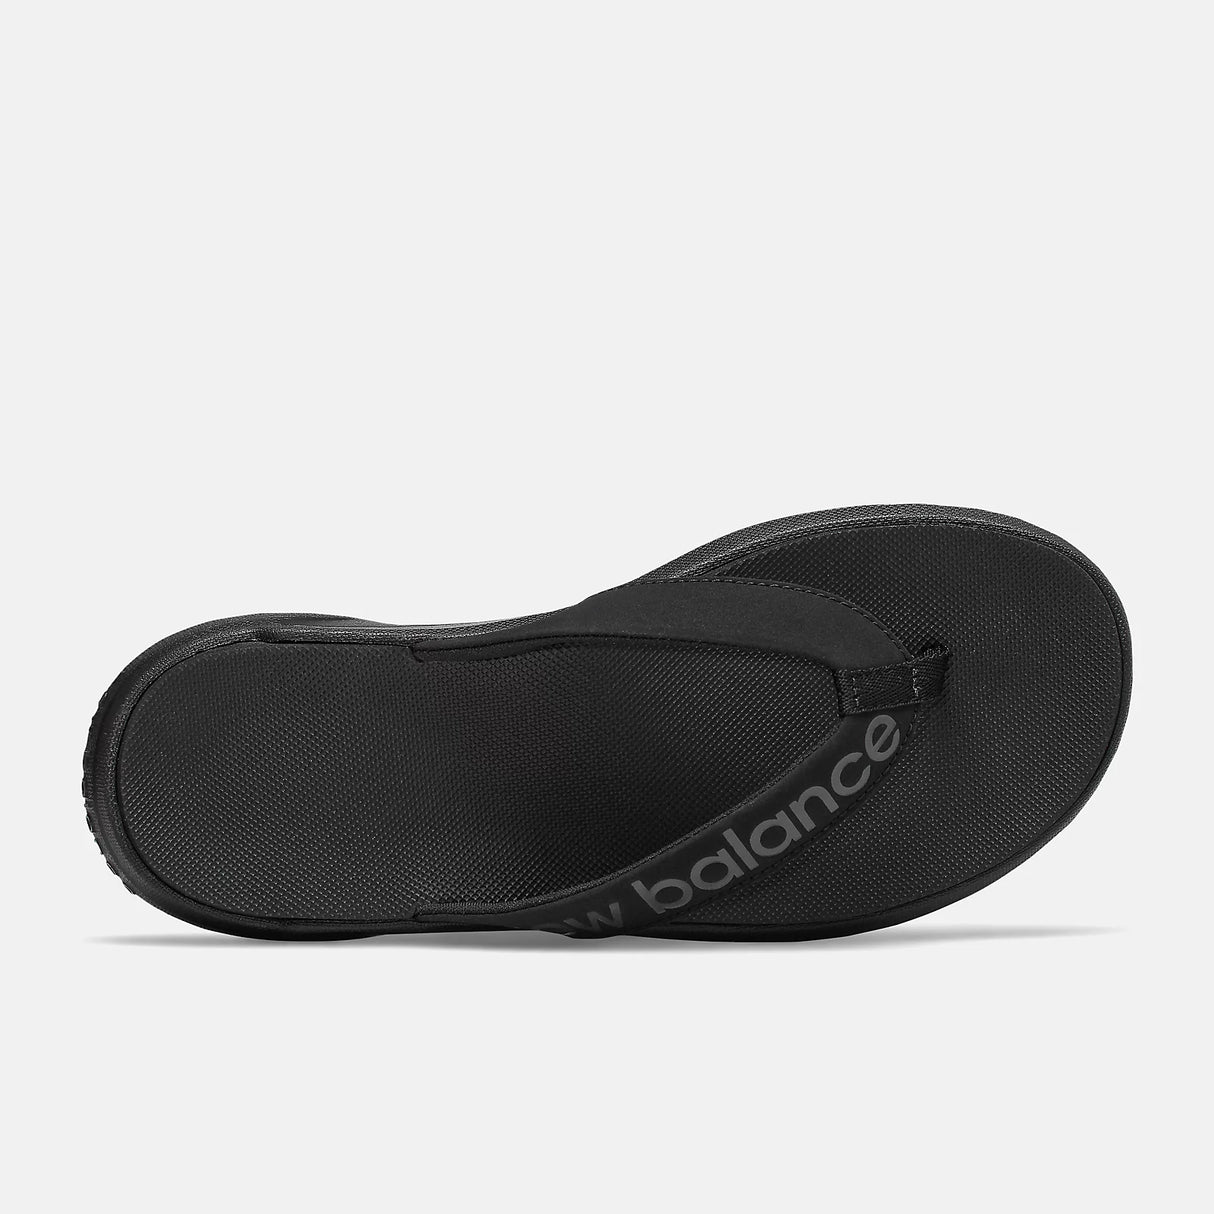 Synthetic Suede Strap Sandal - Ensures an adjustable and secure fit.